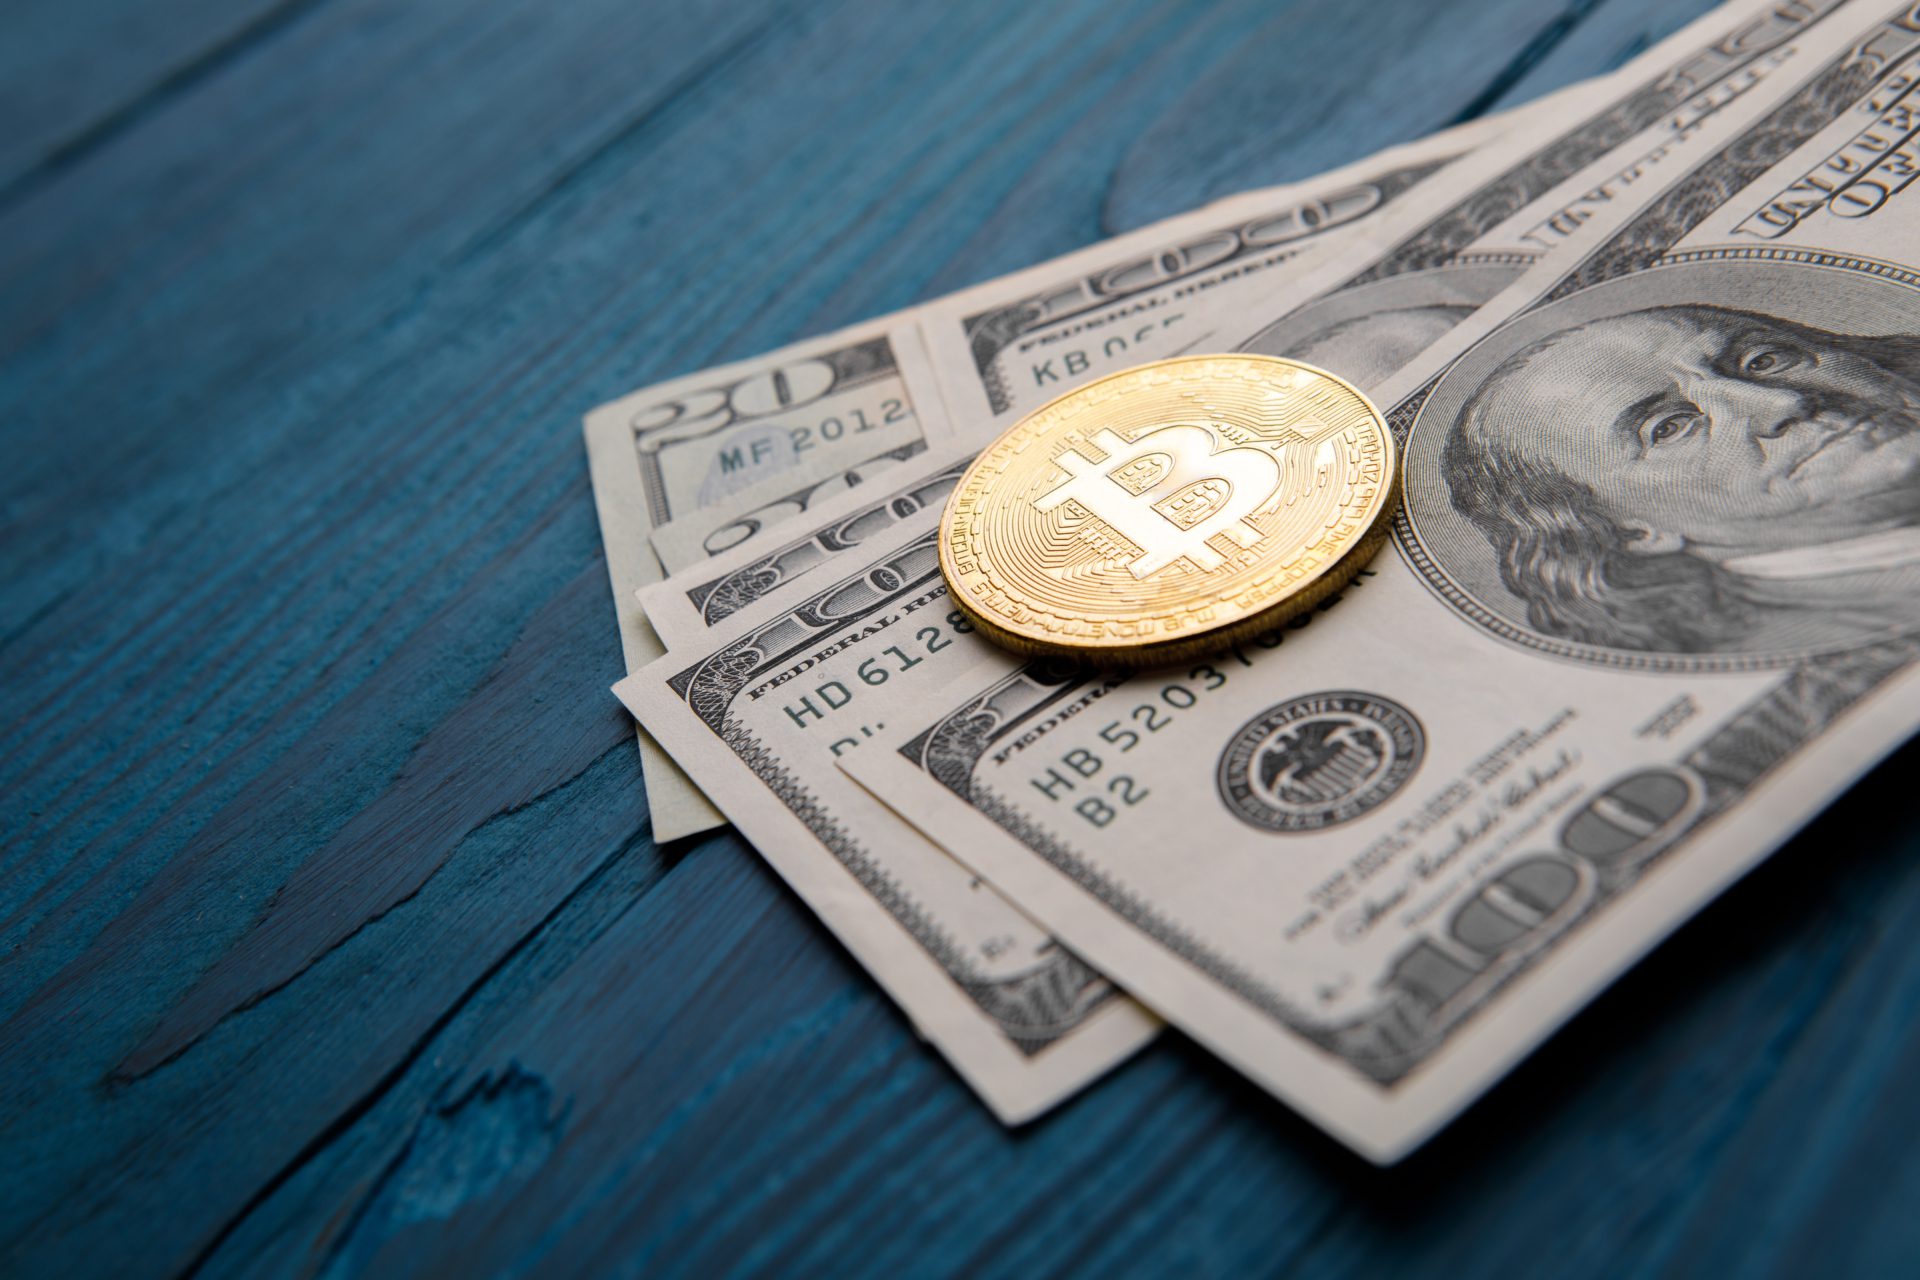 Inflationary pressures are rising in the US, what does this mean for Bitcoin?